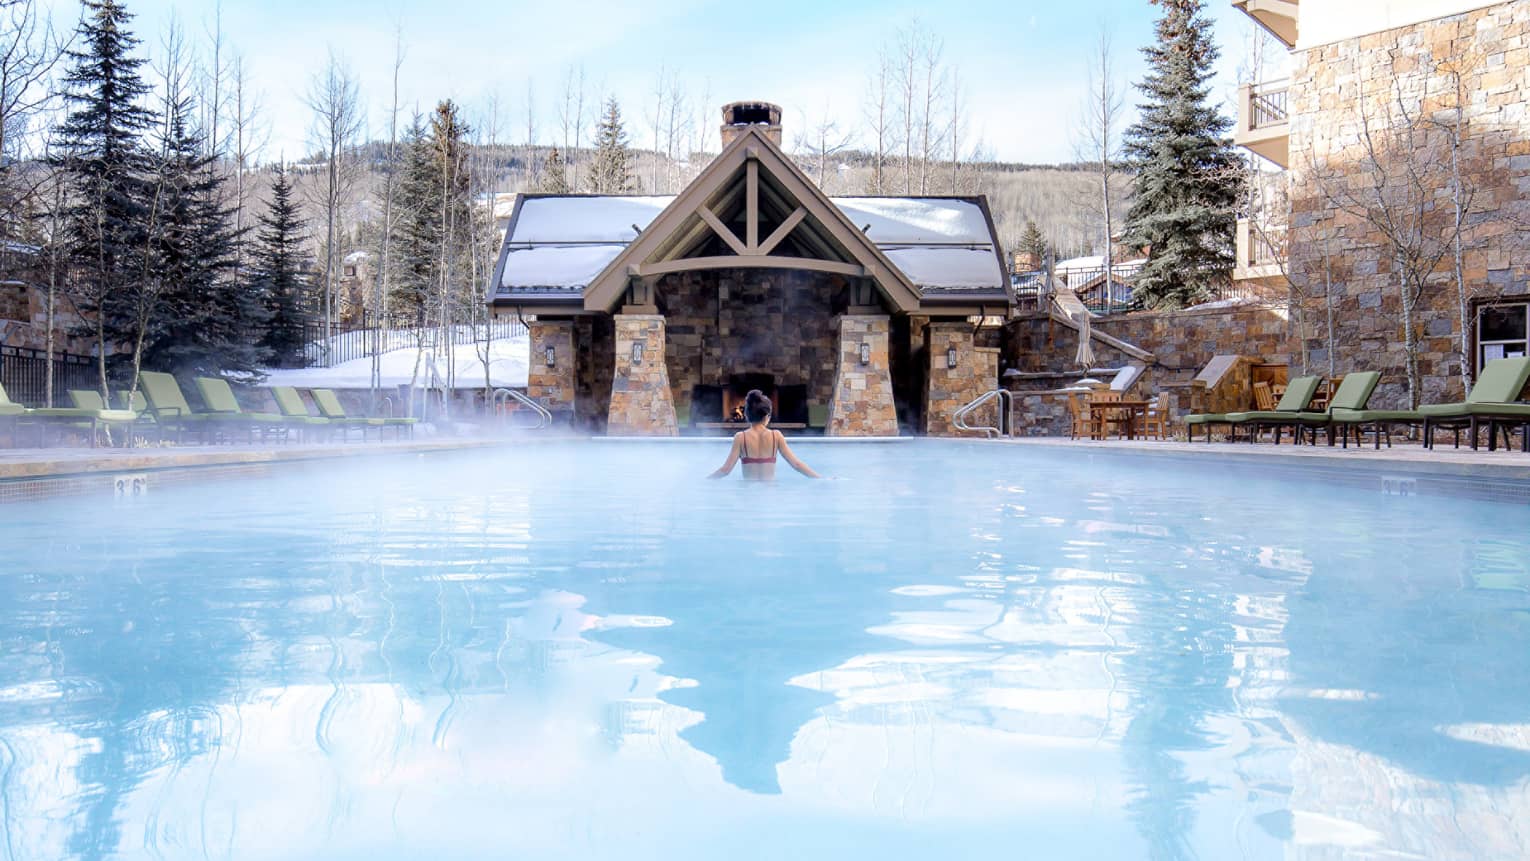 A woman in a pool with a cabin in front of her and snow covered trees around her.